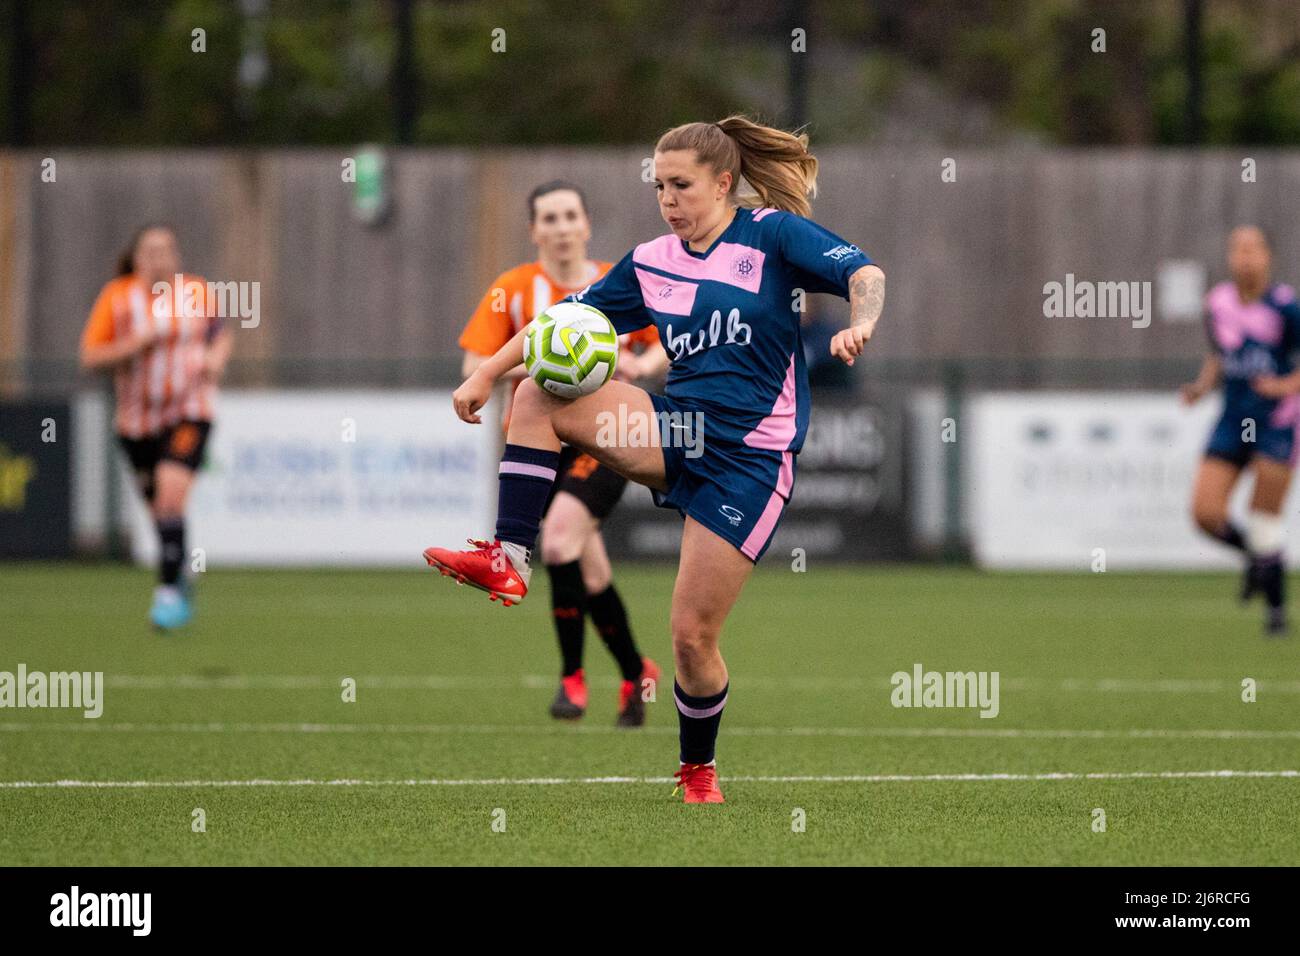 May 3, 2022, London, England, United Kingdom: London, England, May 3rd 2022: Sophie Manzi (9 Dulwich Hamlet) in action during the Capital Womens Senior Cup game between Ashford (Middlesex) and Dulwich Hamlet at Meadowbank in London, England.  Liam Asman/SPP (Credit Image: © Liam Asman/Sport Press Photo via ZUMA Press) Stock Photo